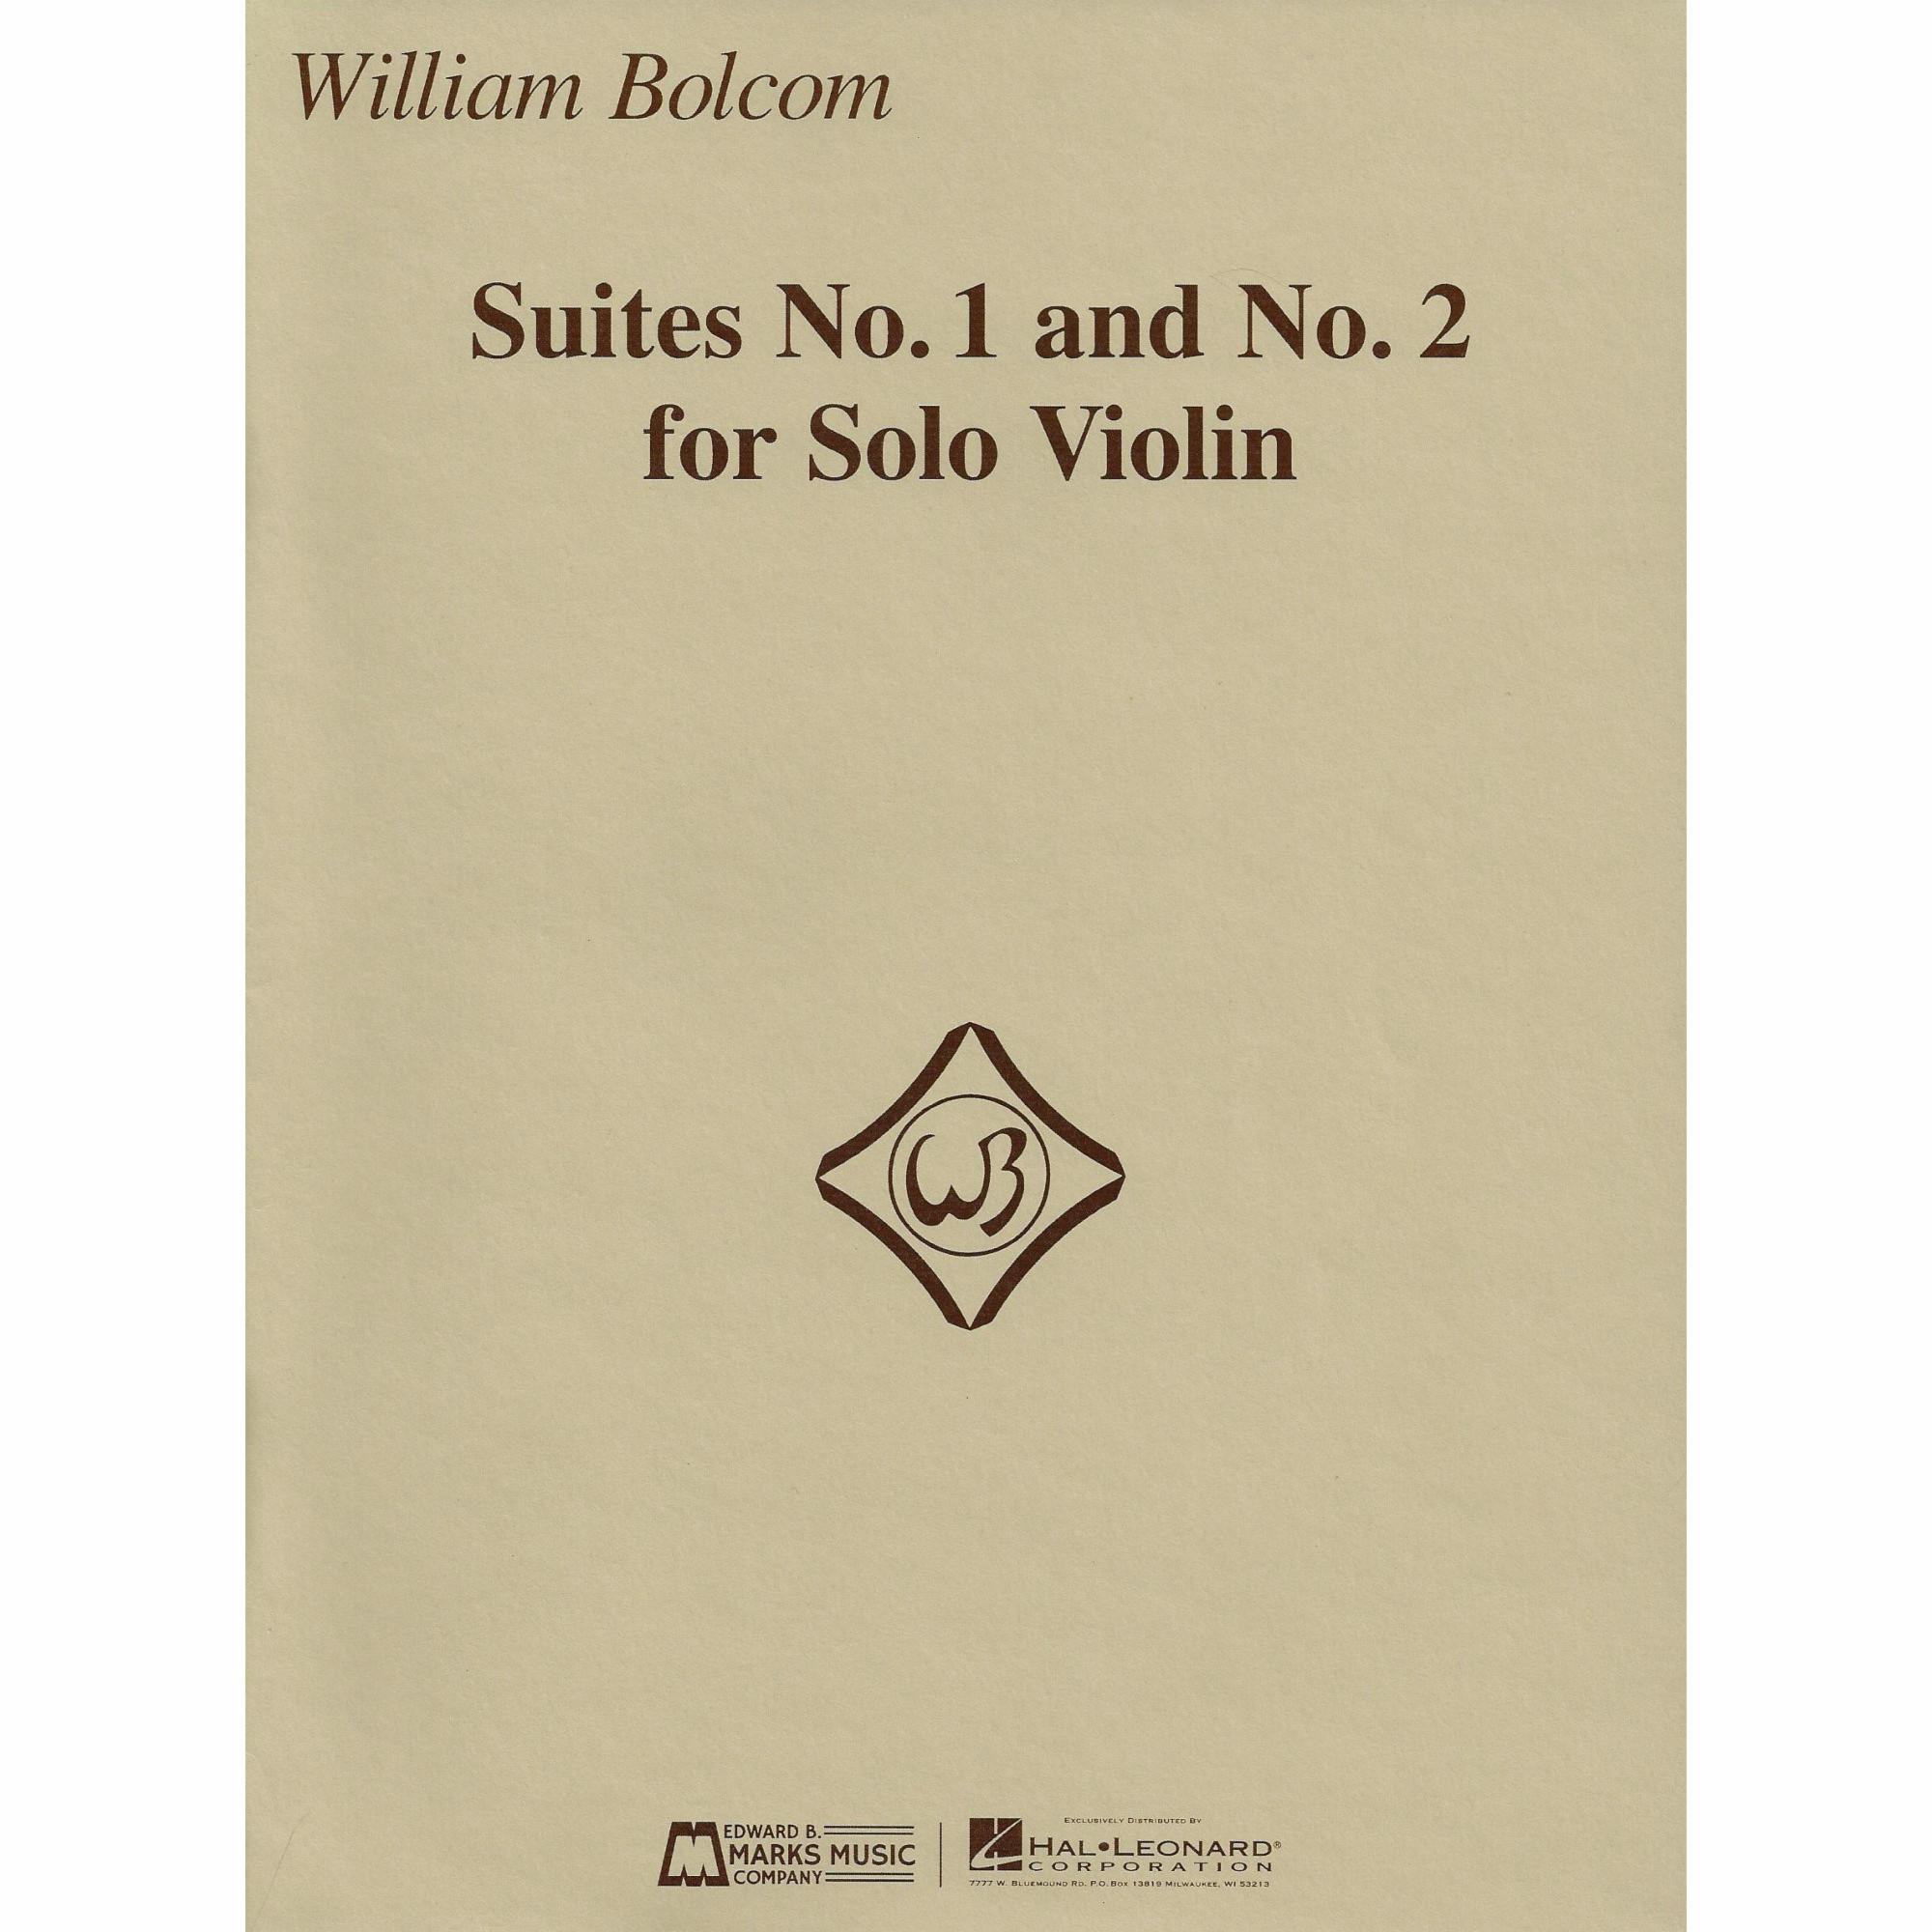 Suites Nos. 1 and 2 for Solo Violin